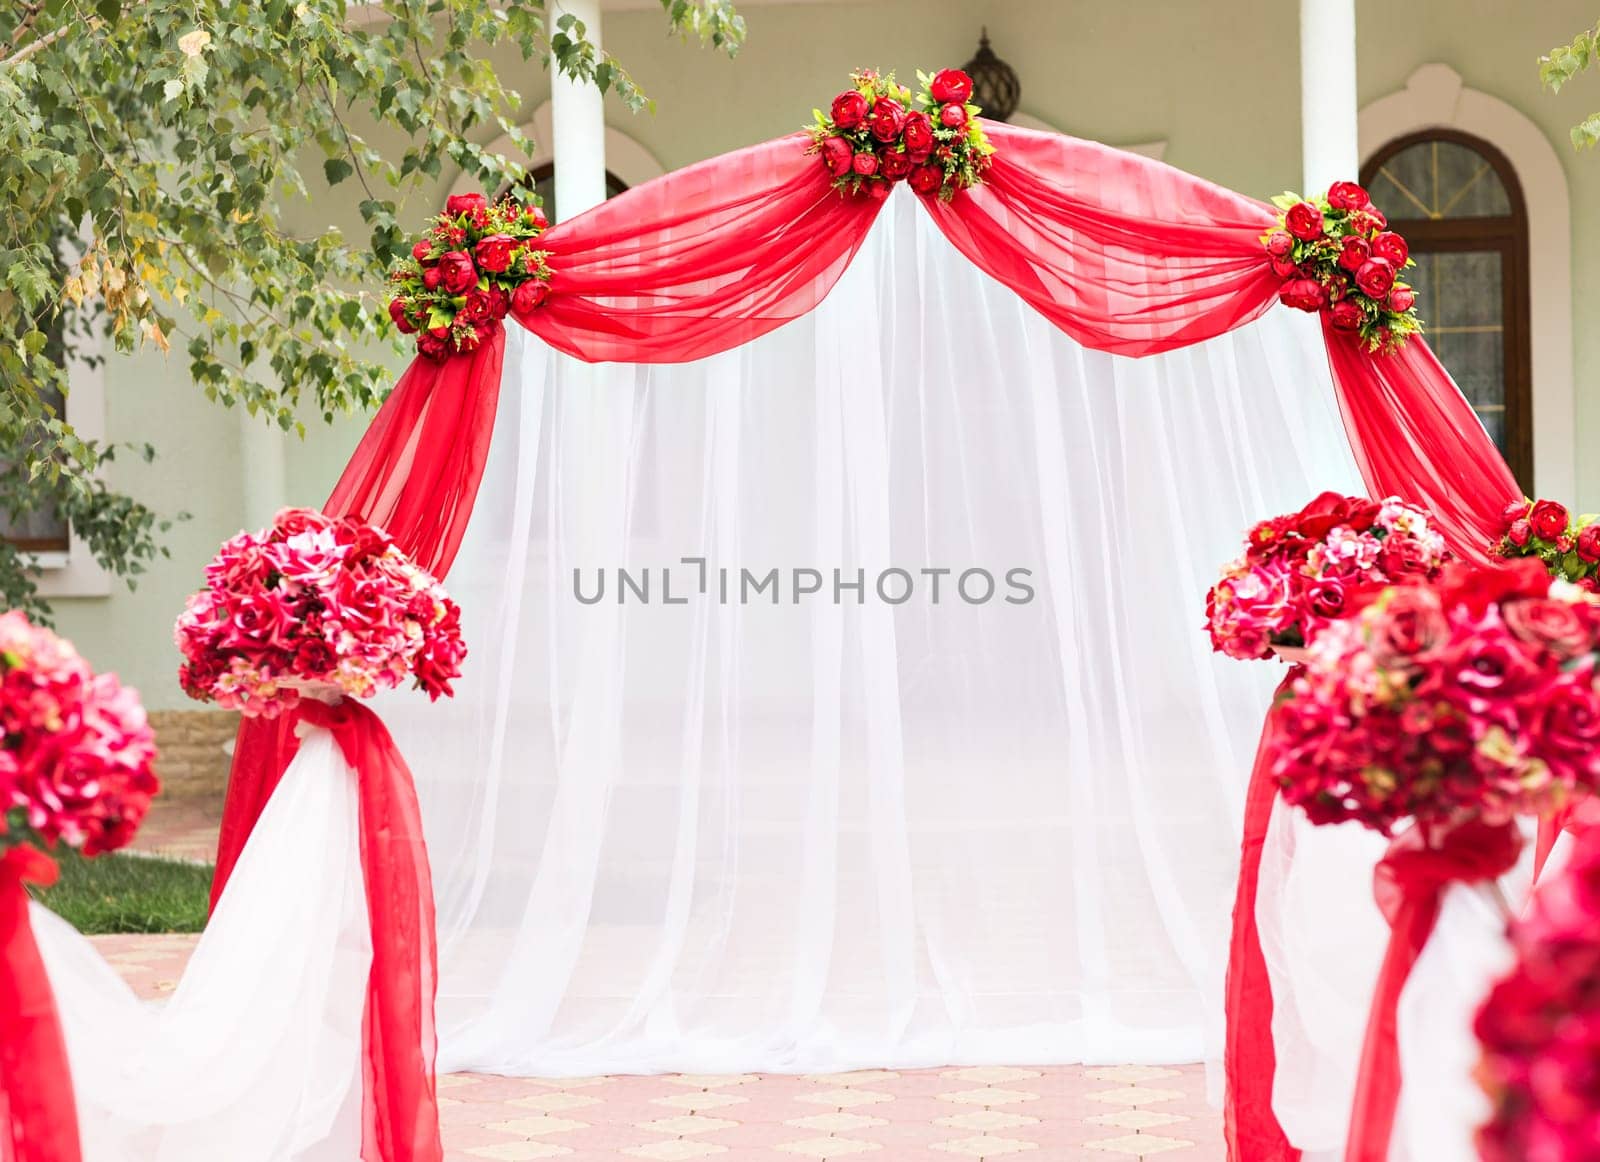 Wedding Ceremony Decorations Outdoors by Satura86